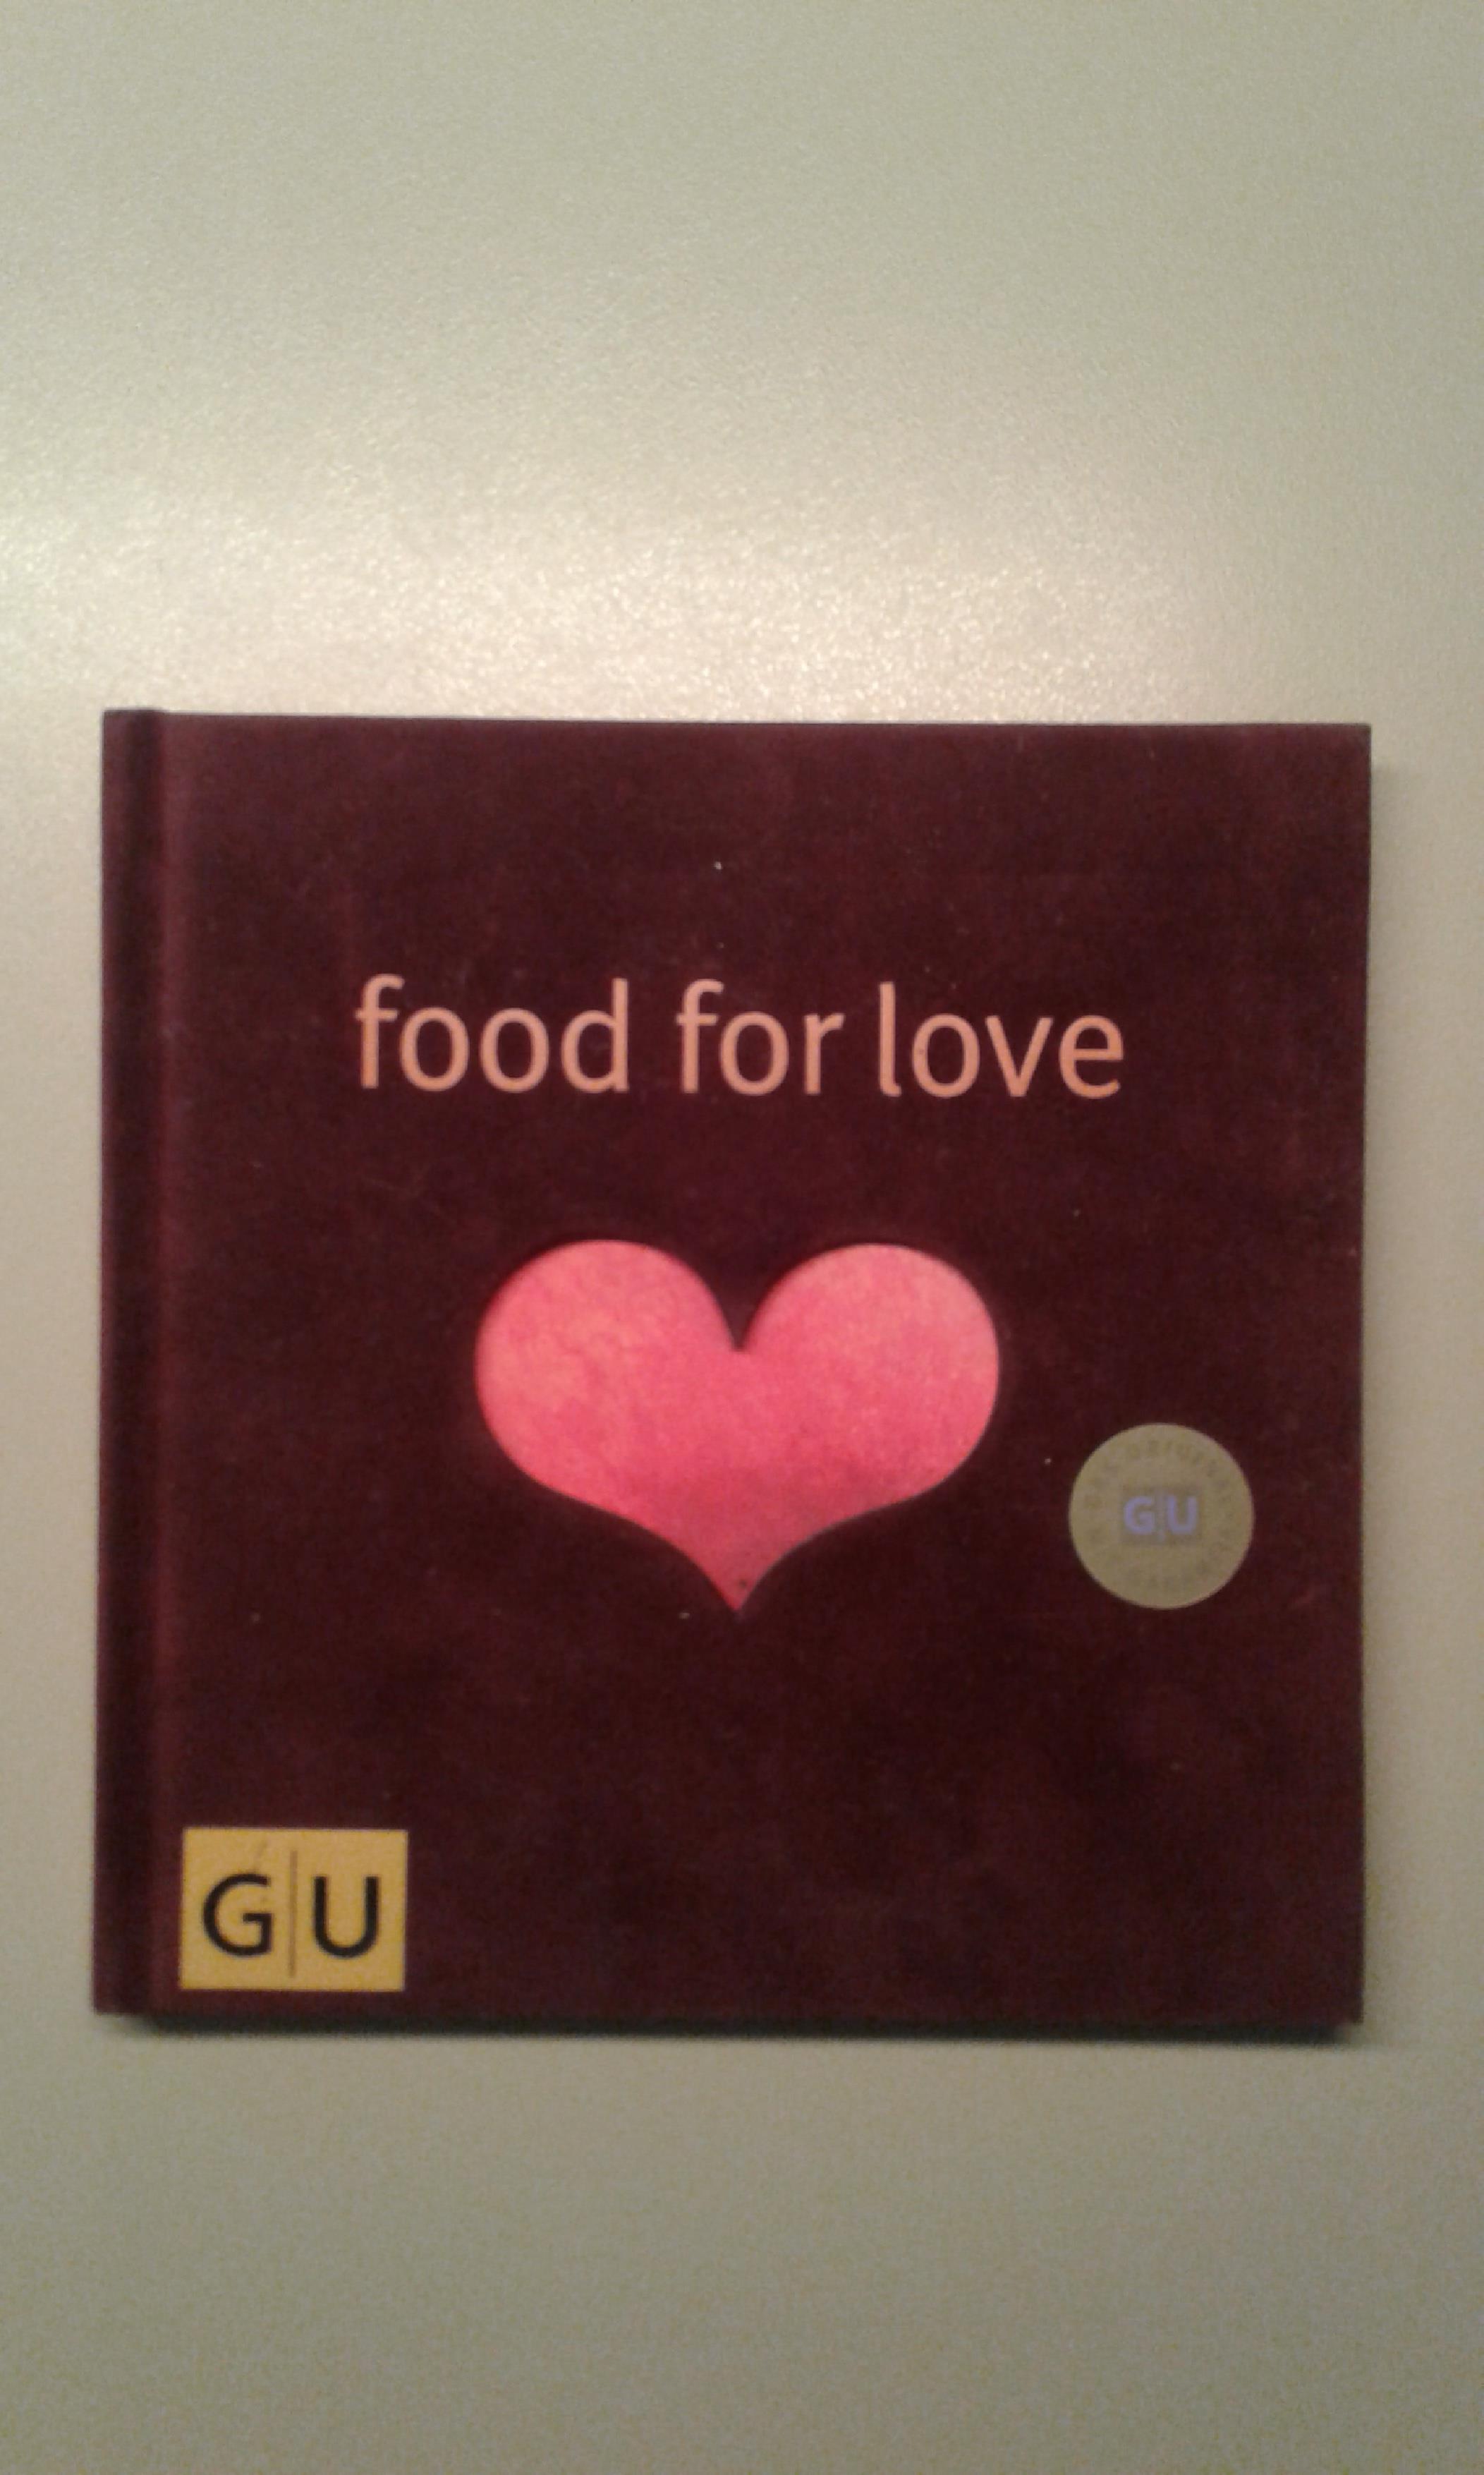 Food for love.